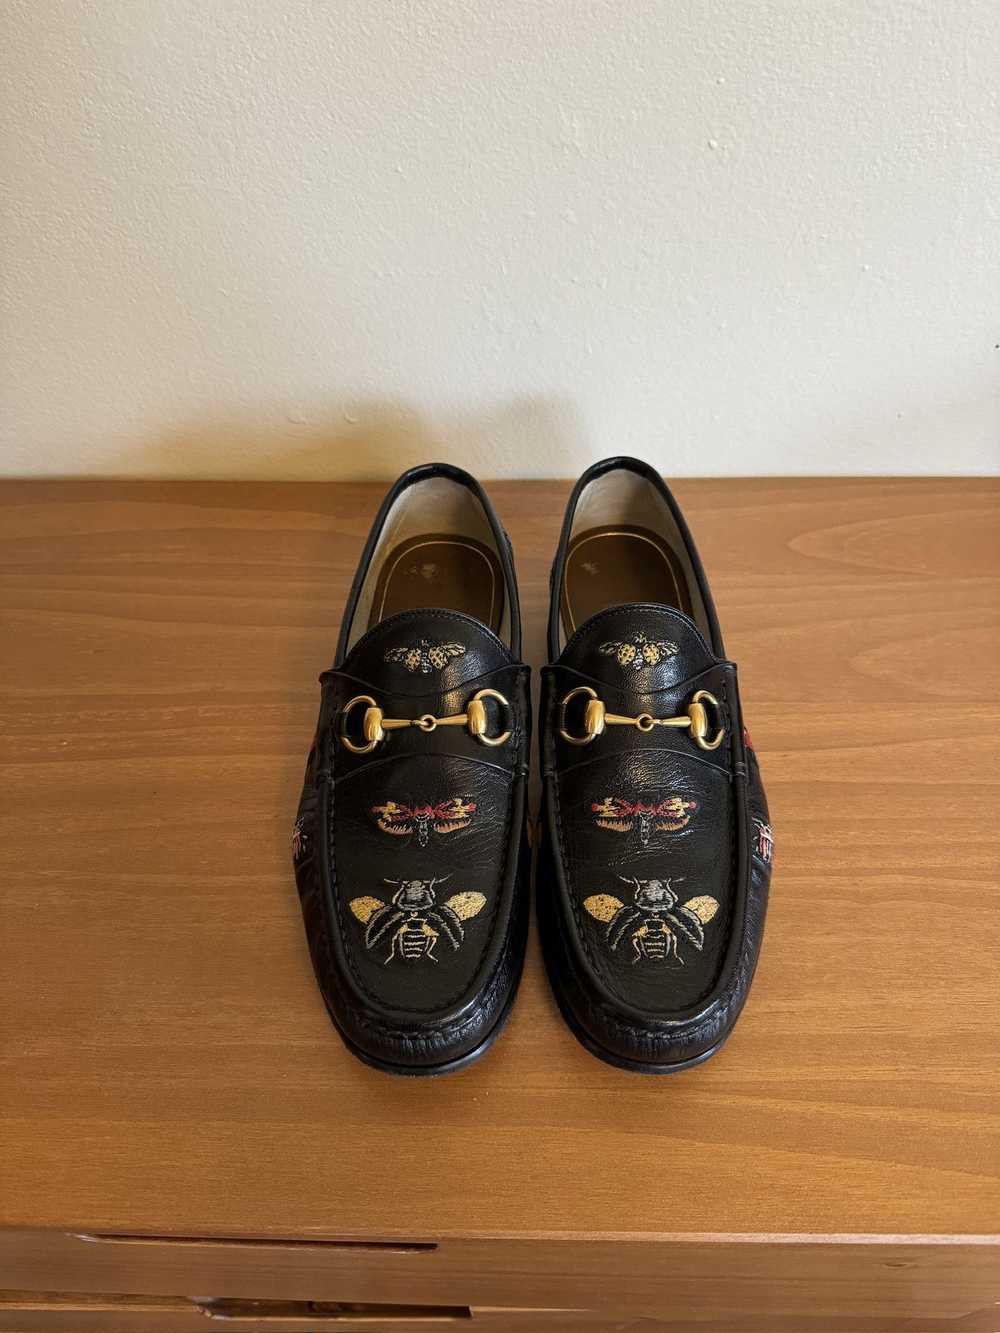 Gucci 1953 Embroidered Horsebit Loafers - image 3